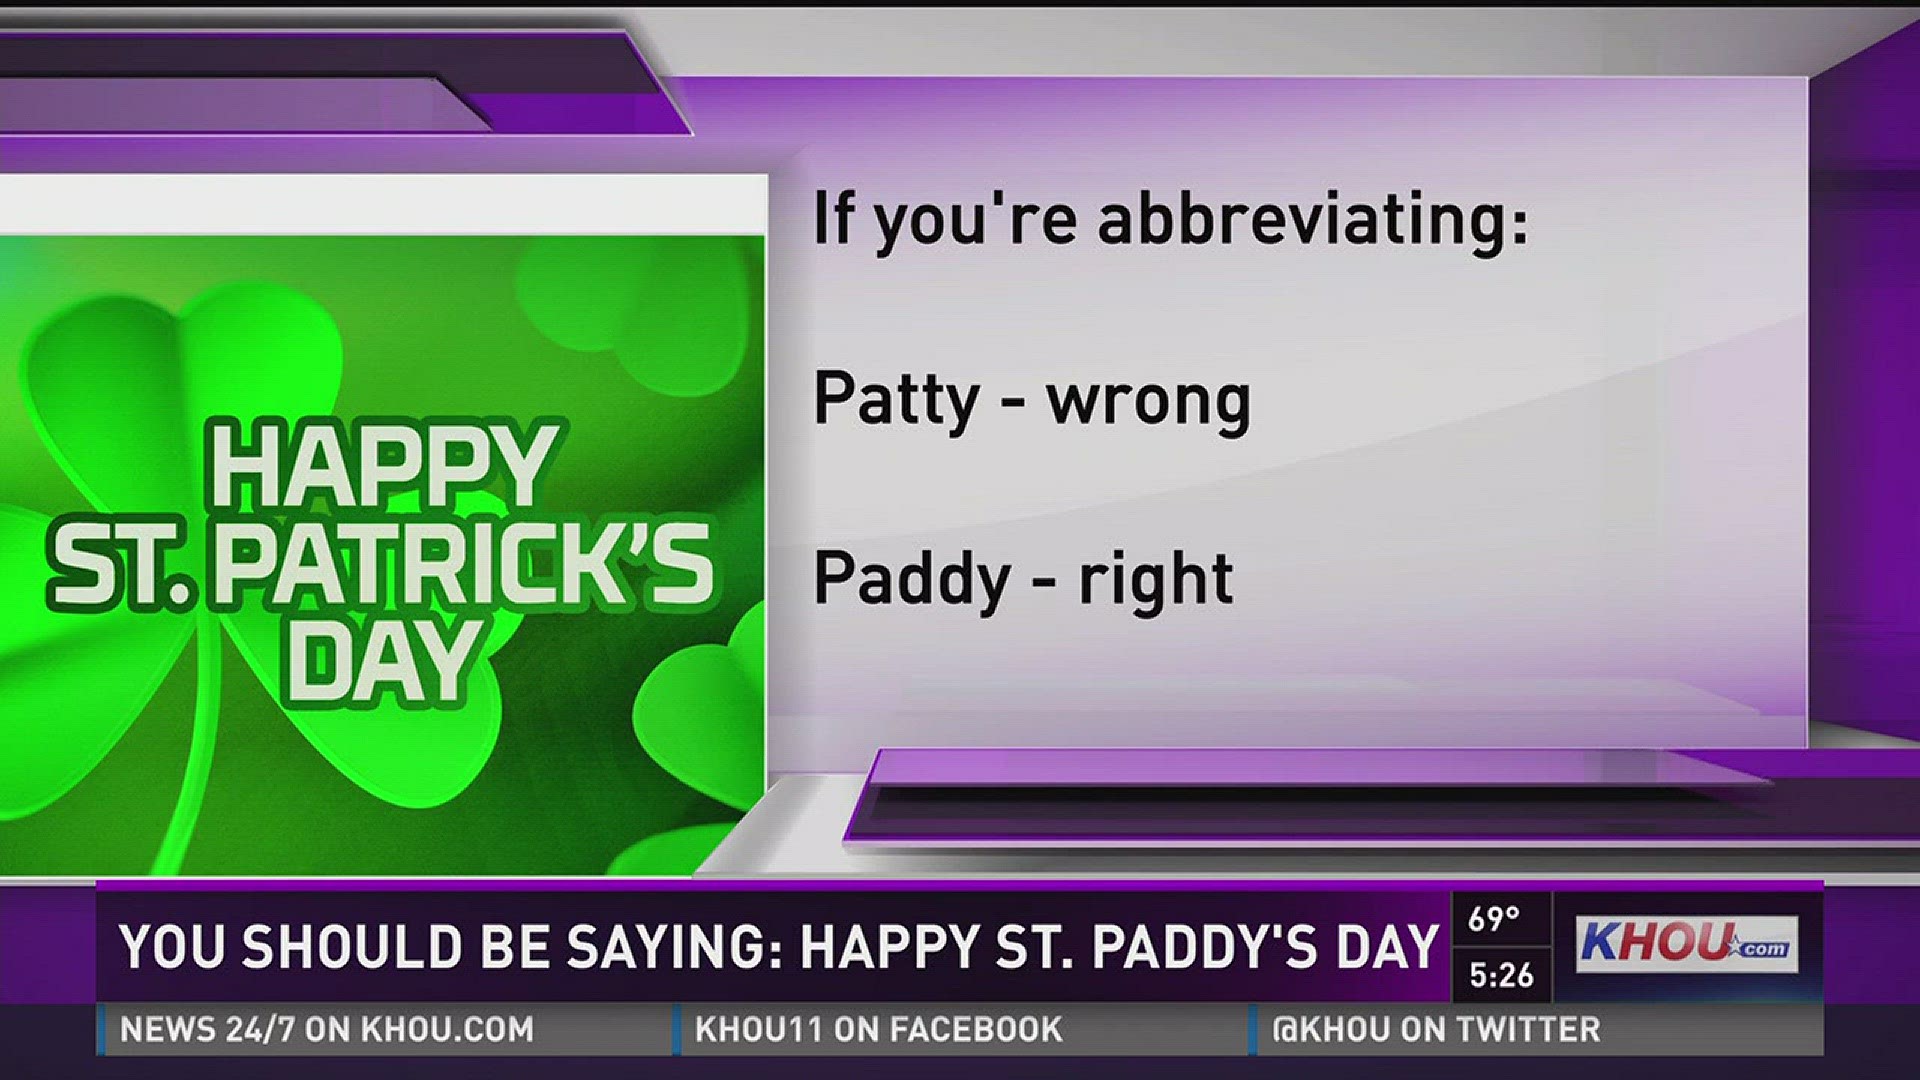 If you are abbreviating St. Patrick's Day as "Patty" day you are wrong. The correct abbreviation is PADDY'S DAY.